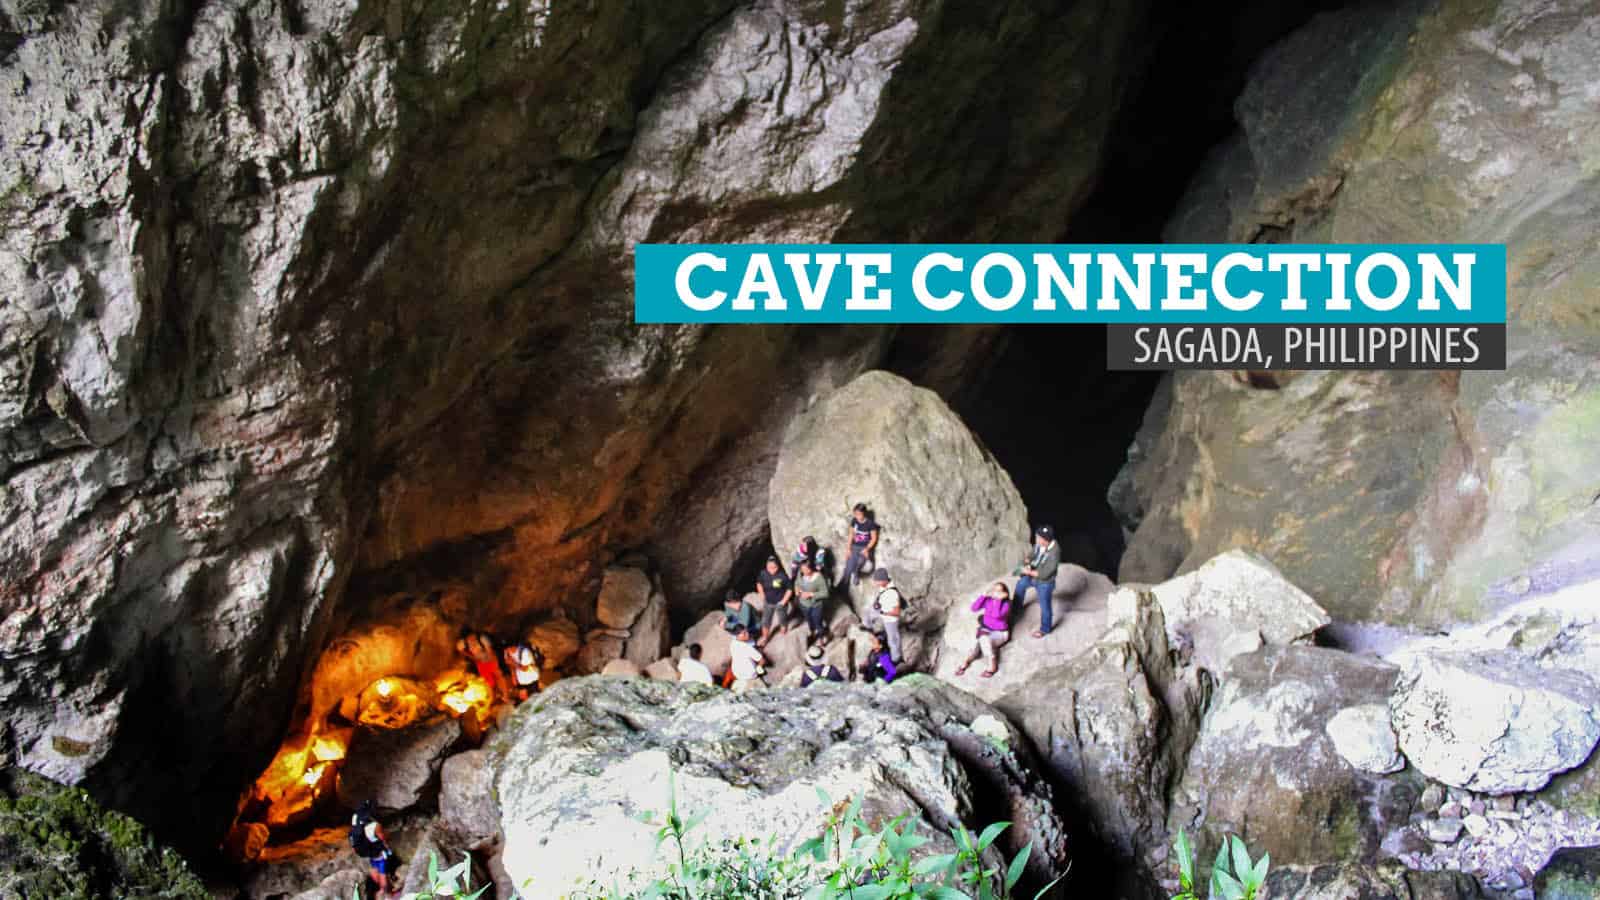 CAVE CONNECTION: Next-Level Spelunking in Sagada, Philippines